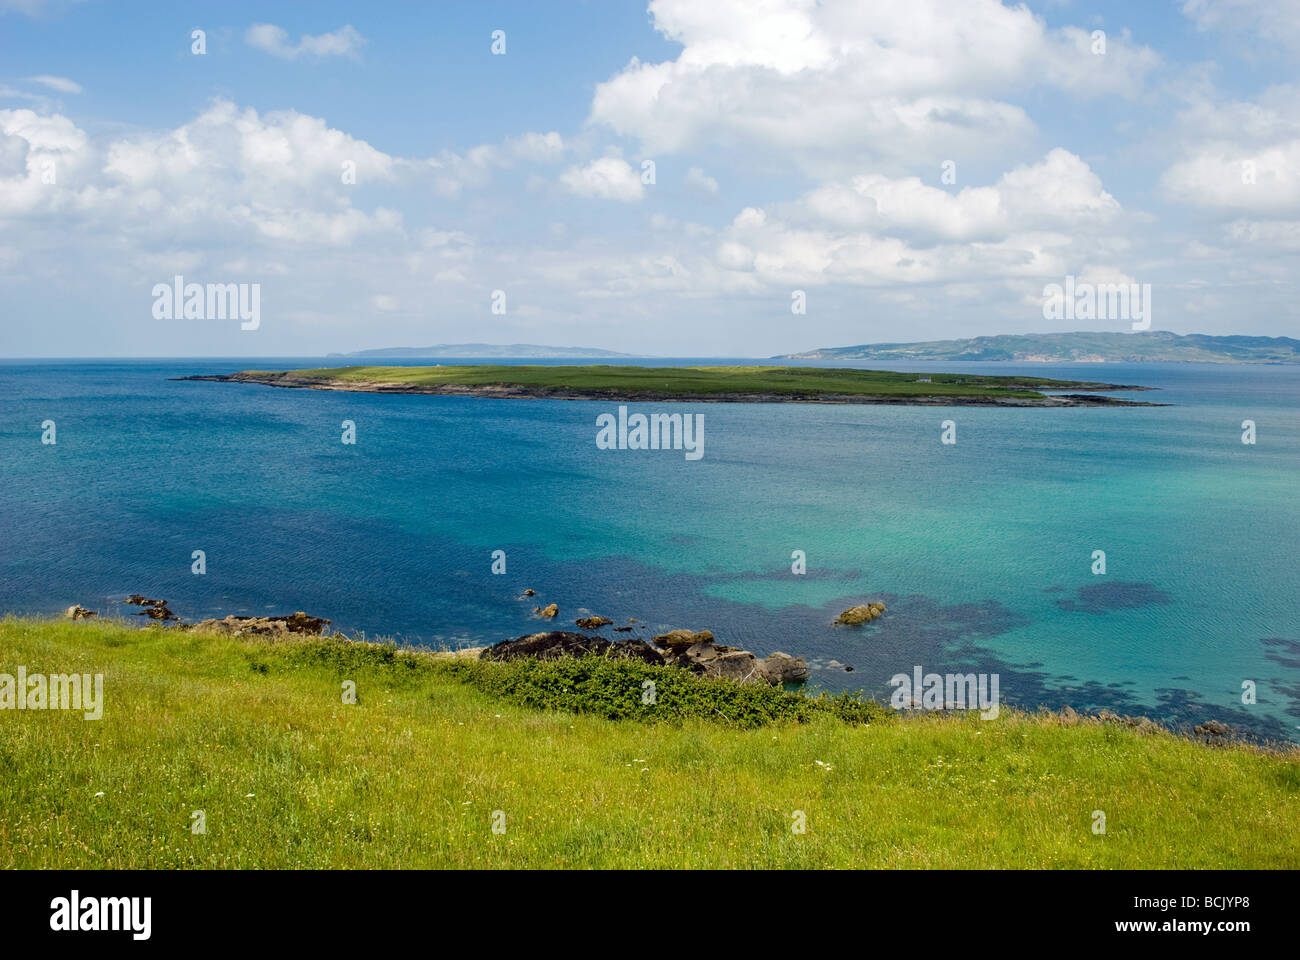 View of Inishkeel Island, Portnoo, south west Donegal Stock Photo